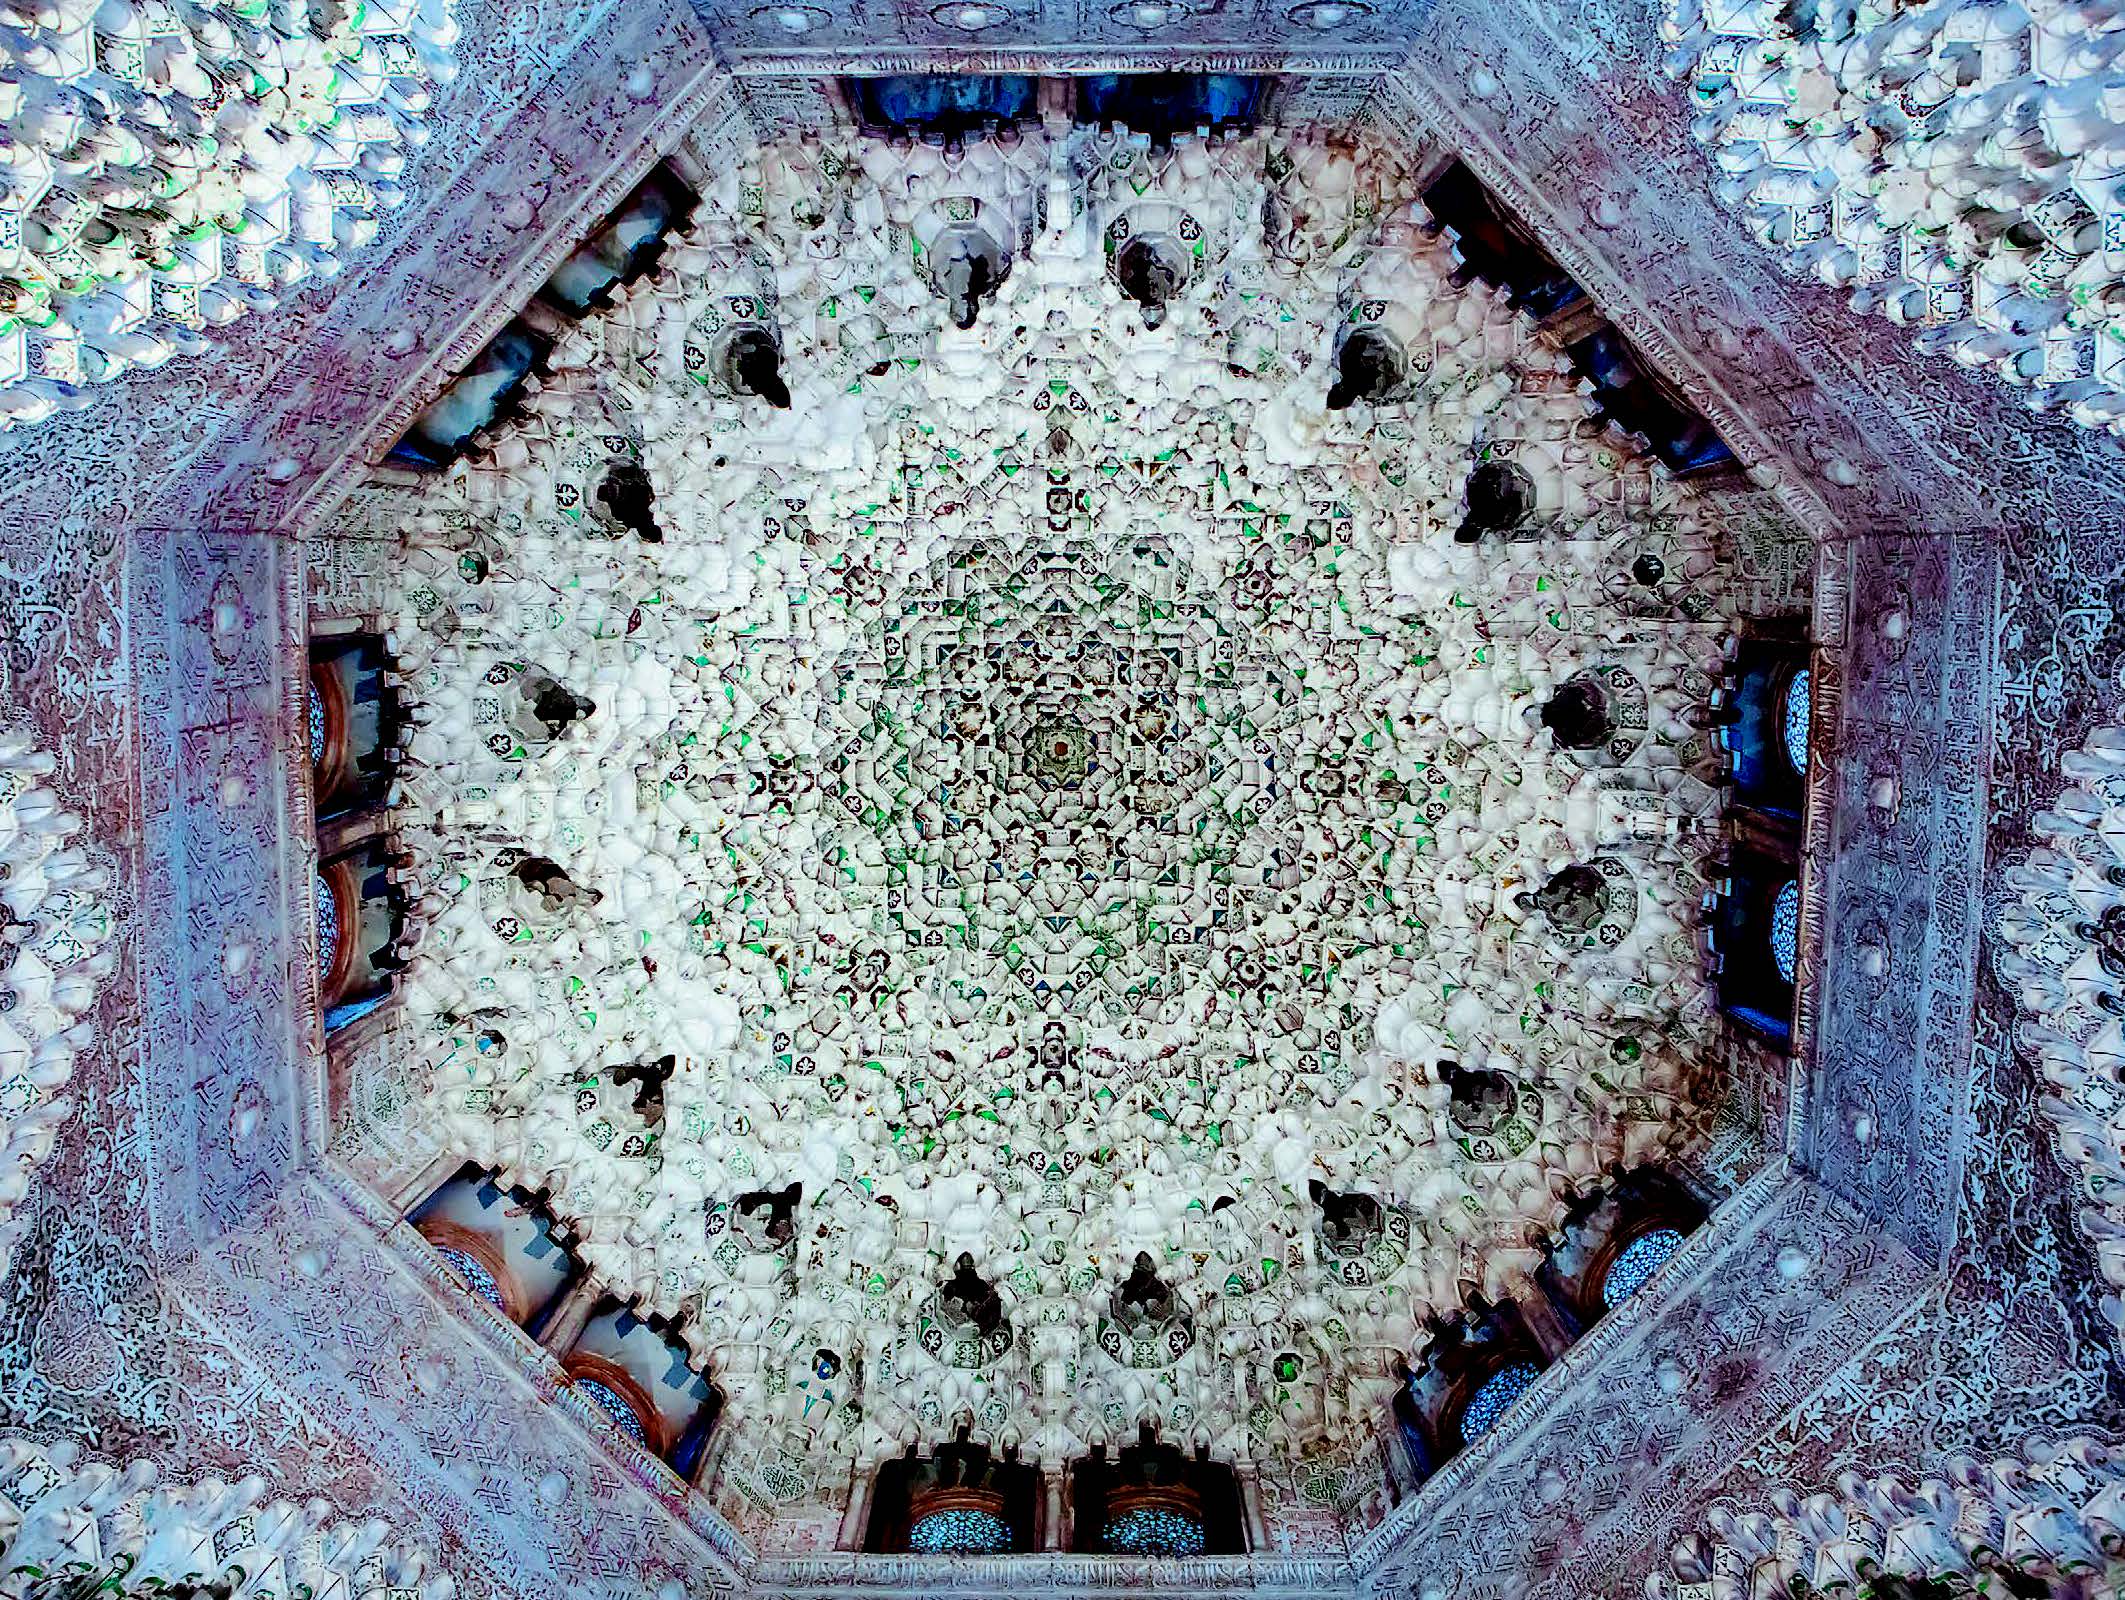 GRANADA, SPAIN: ALHAMBRA, HALL OF THE TWO SISTERS This octagonal muqarnas ceiling contains 5,416 plaster elements, many of which bear traces of their original paint, gold and silver decoration. A poem in Arabic by the 14th-century Nasrid court poet Ibn Zamrak inscribed on the walls below translates: “In the cupola such splendor does the chamber acquire that the palace competes with the very firmament.”